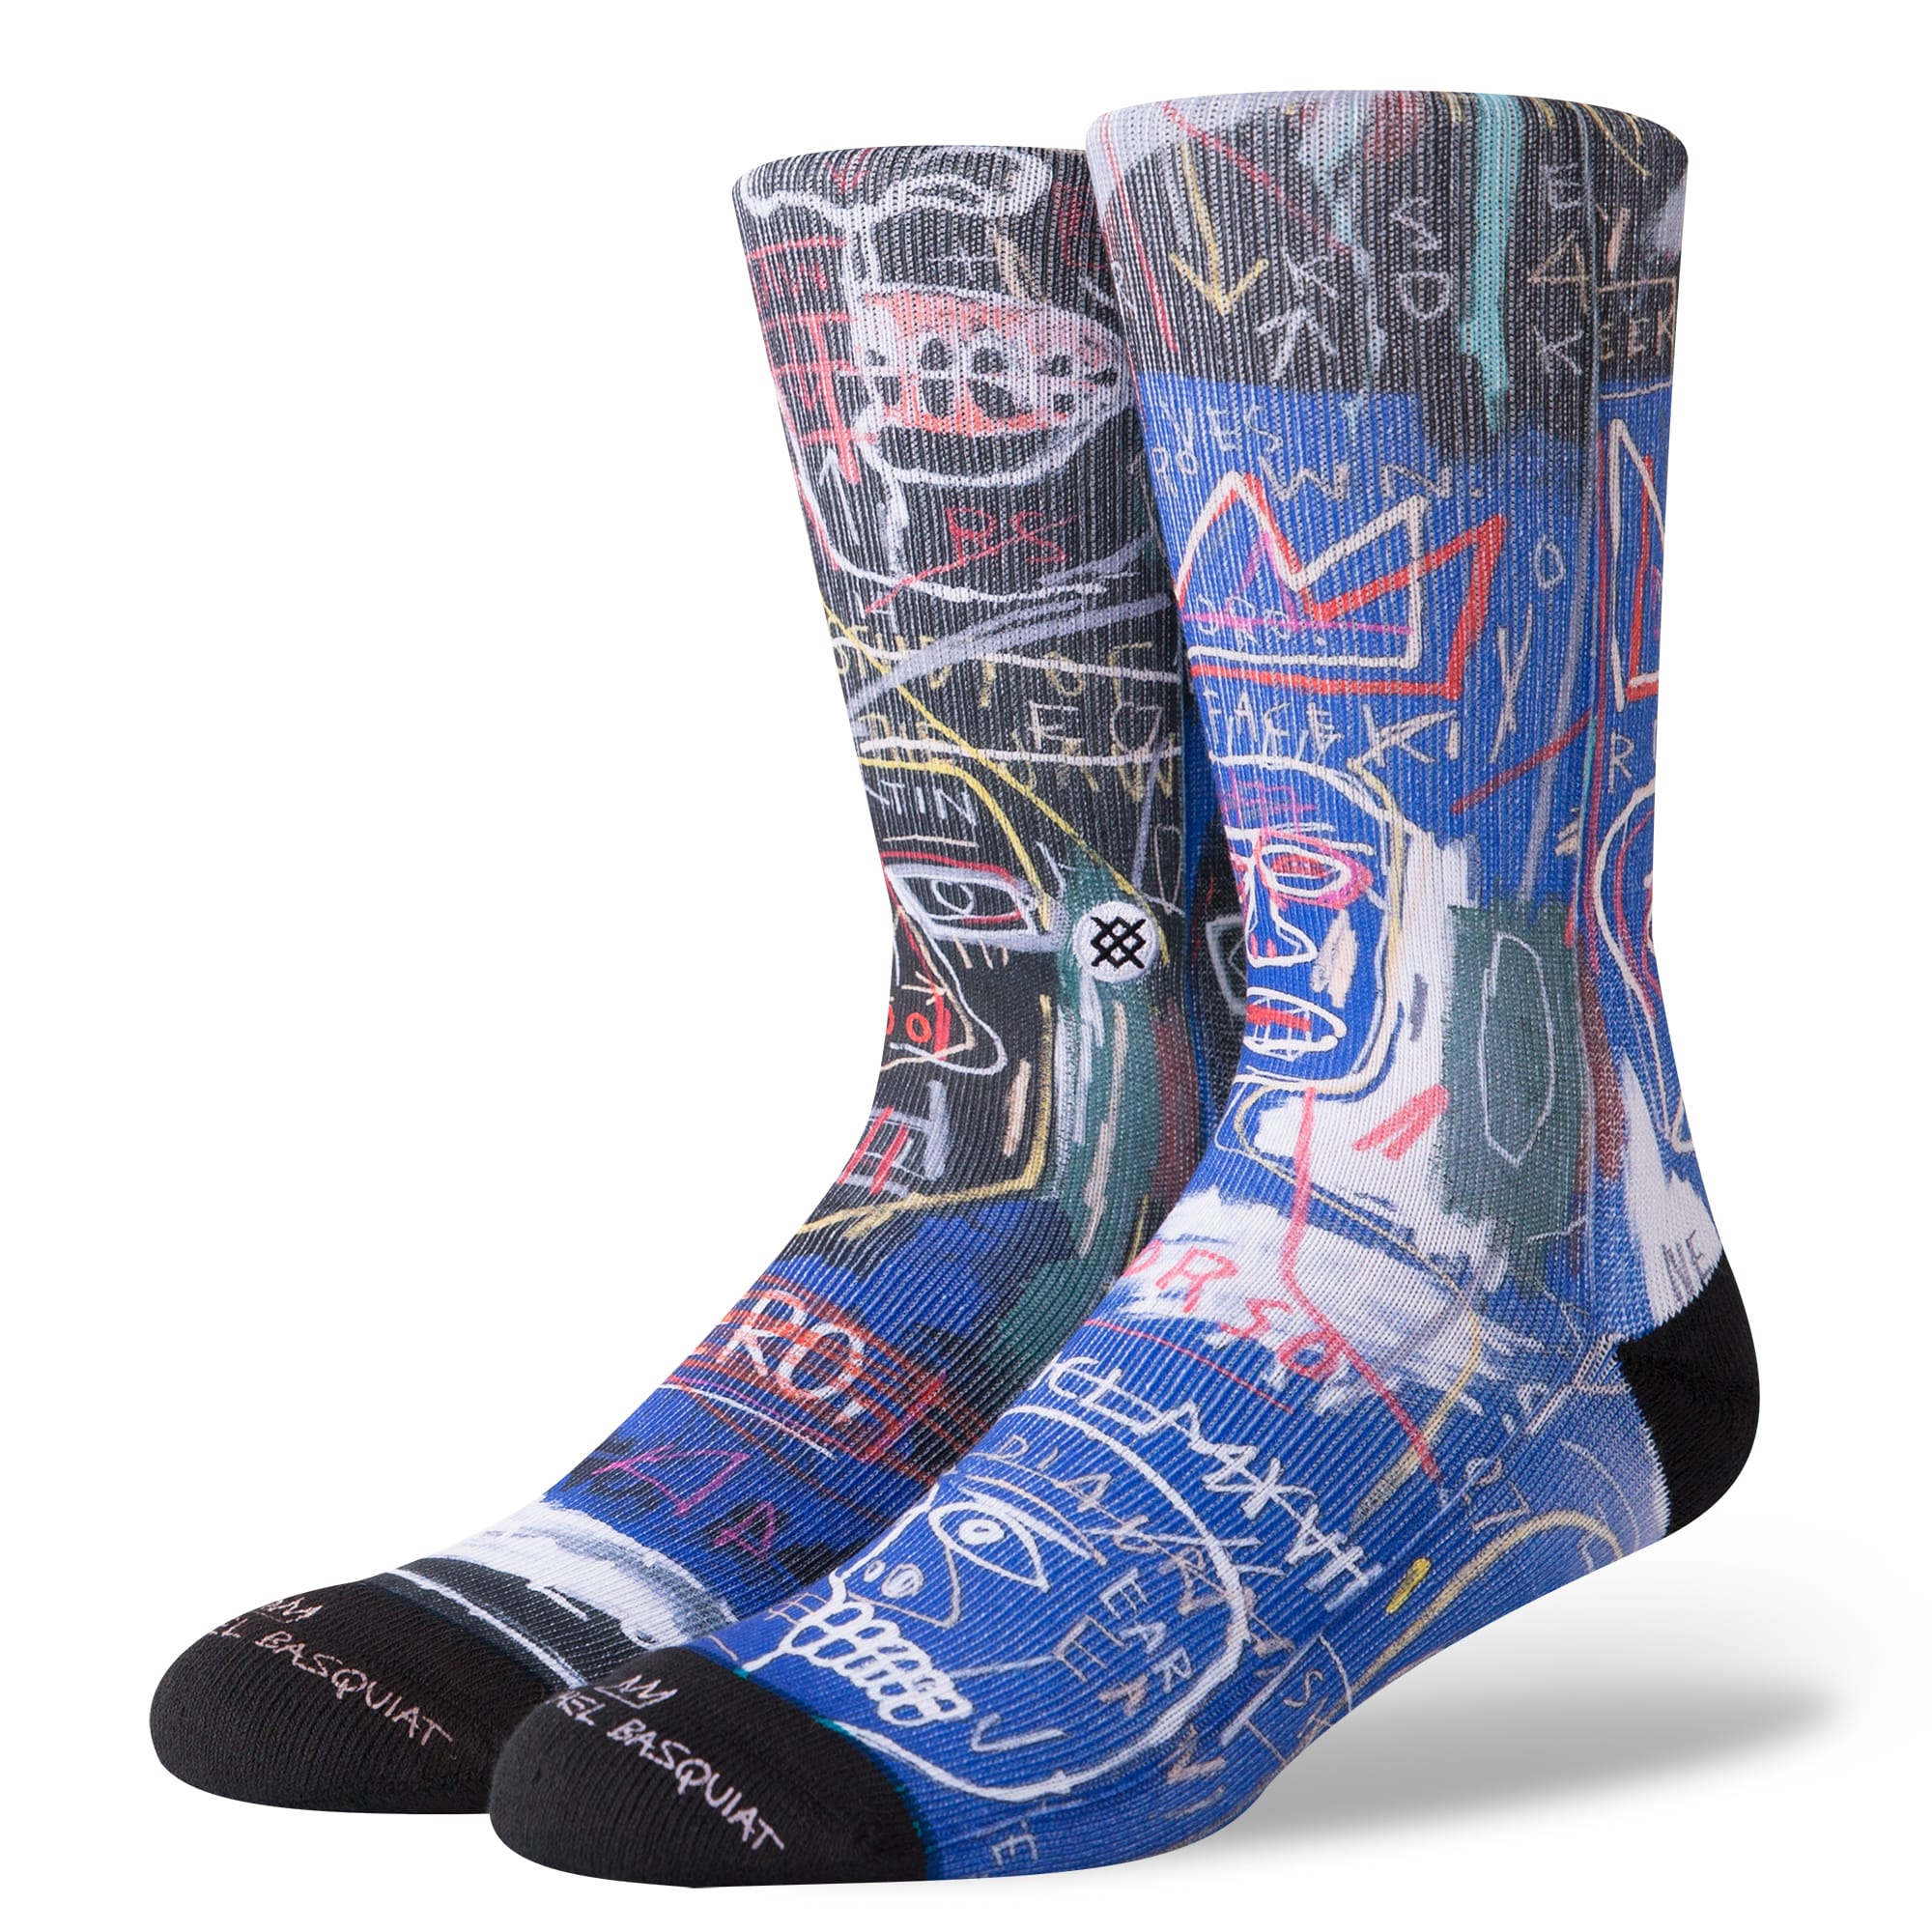 Stance Has Released A New Collection Of Jean-Michel Basquiat-Themed Socks